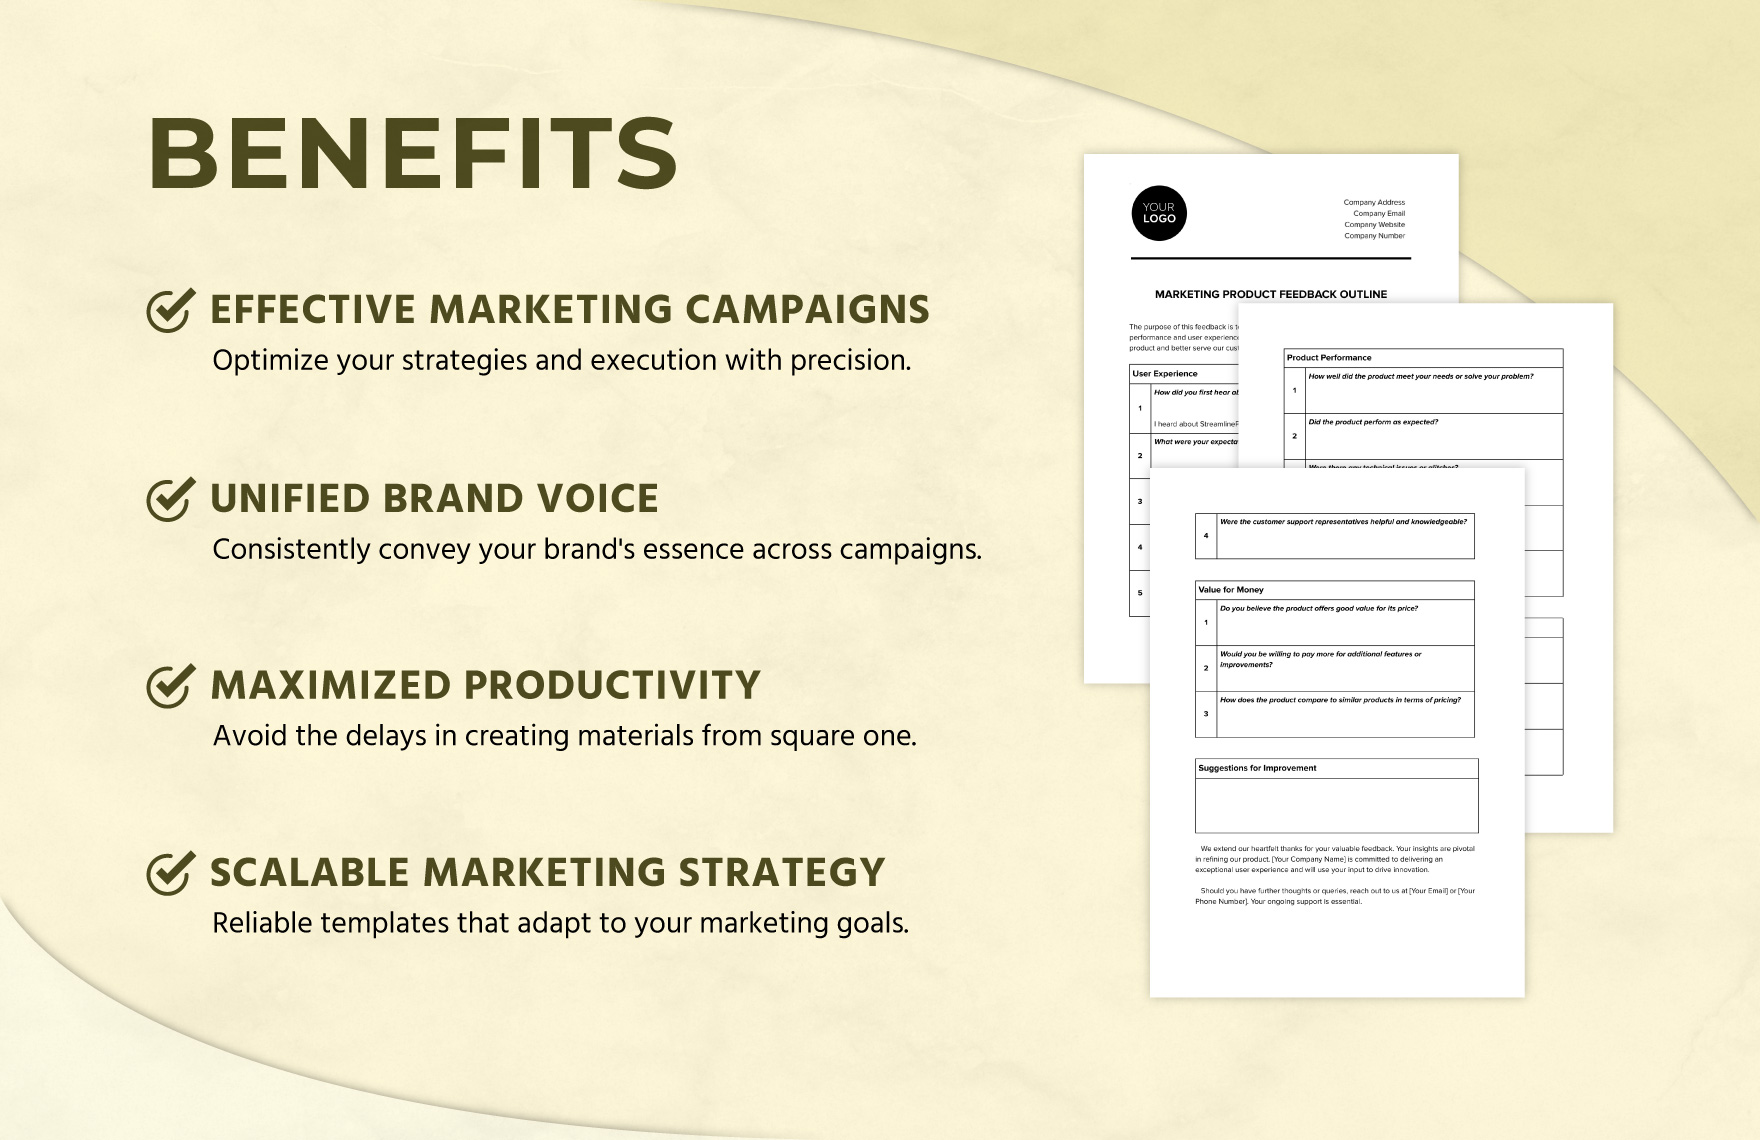 Marketing Product Feedback Outline Template